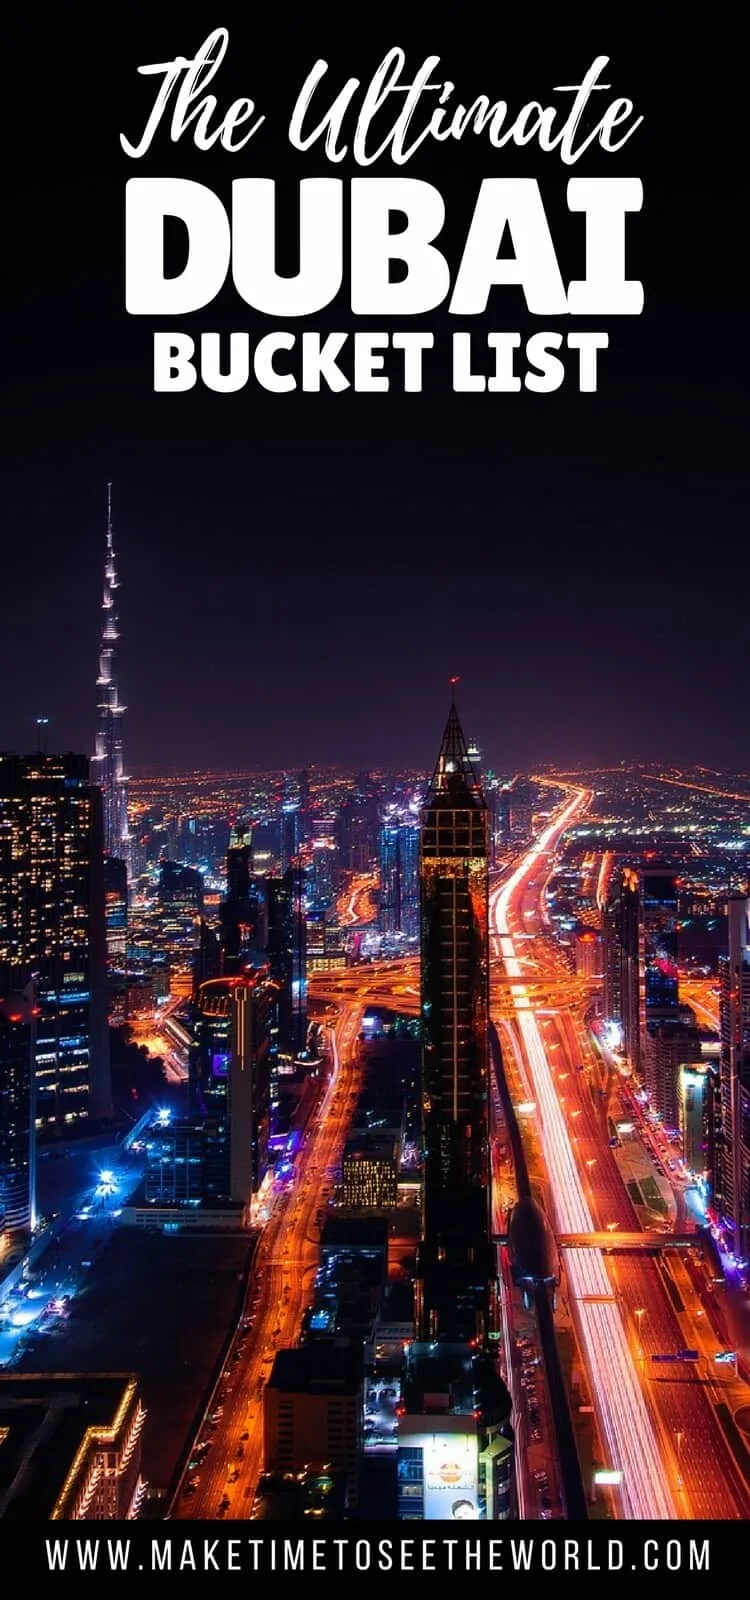 Pin image of Dubai at night from above with text overlay: The Ultimate Dubai Bucket List